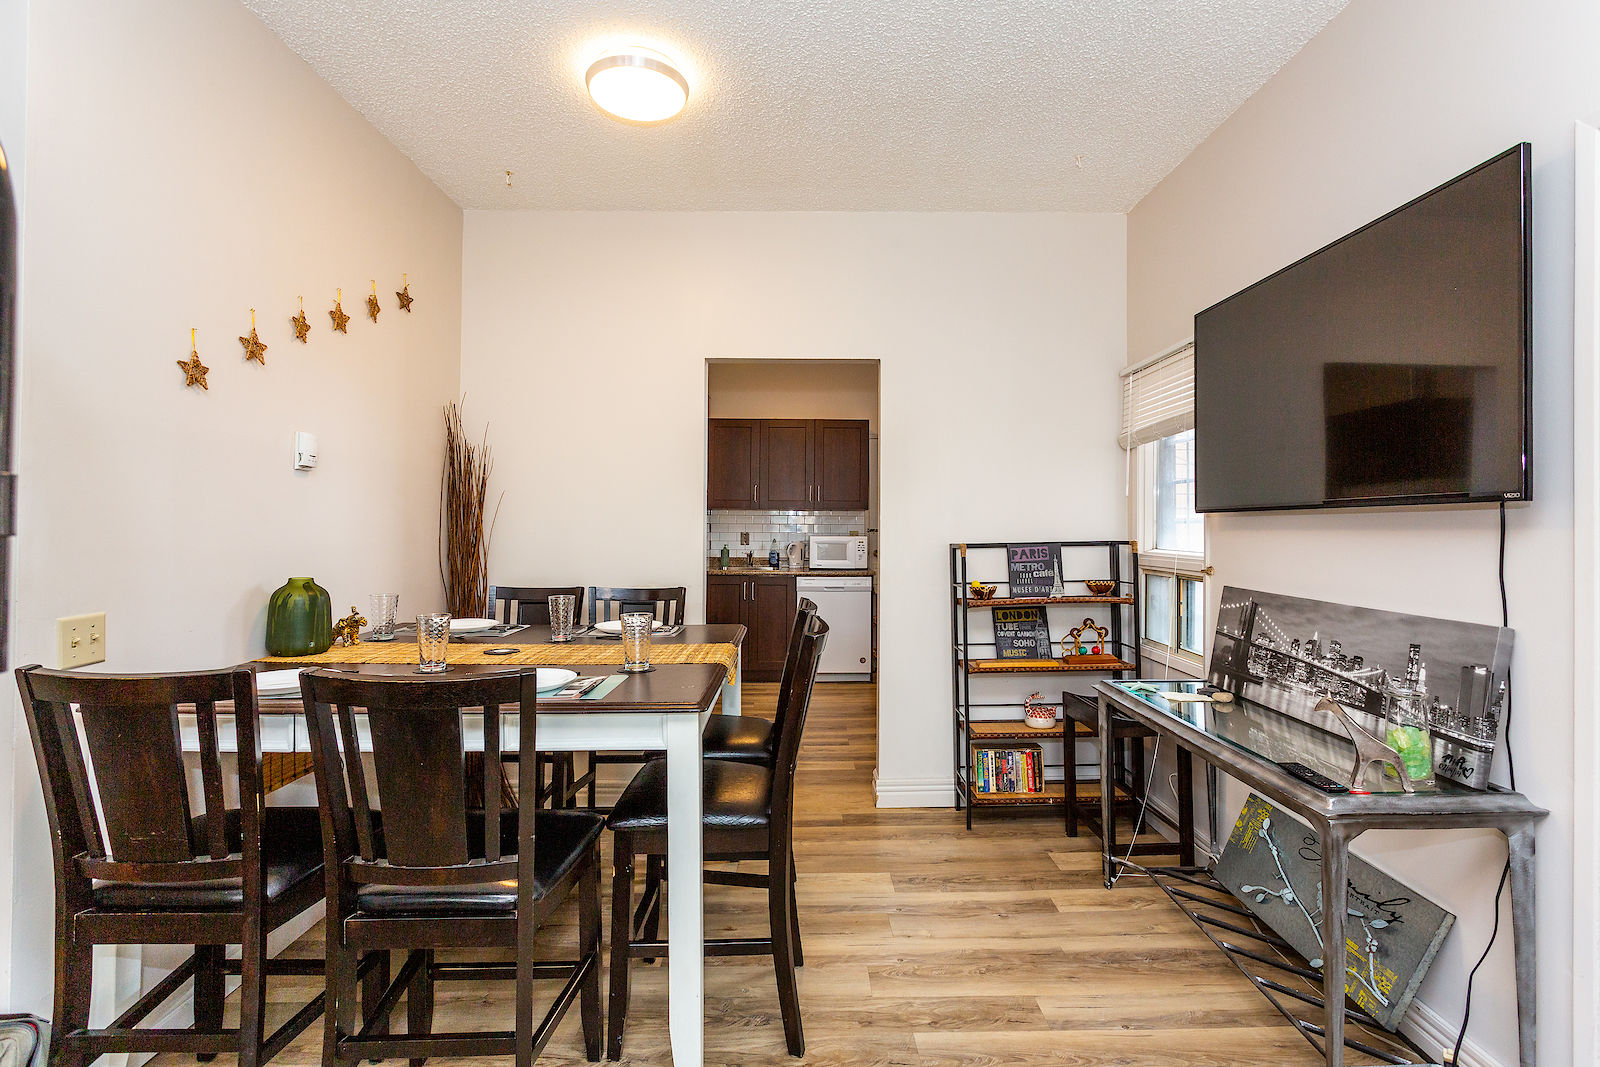 Calgary Pet Friendly House For Rent Beltline 3bdrm Bungalow In